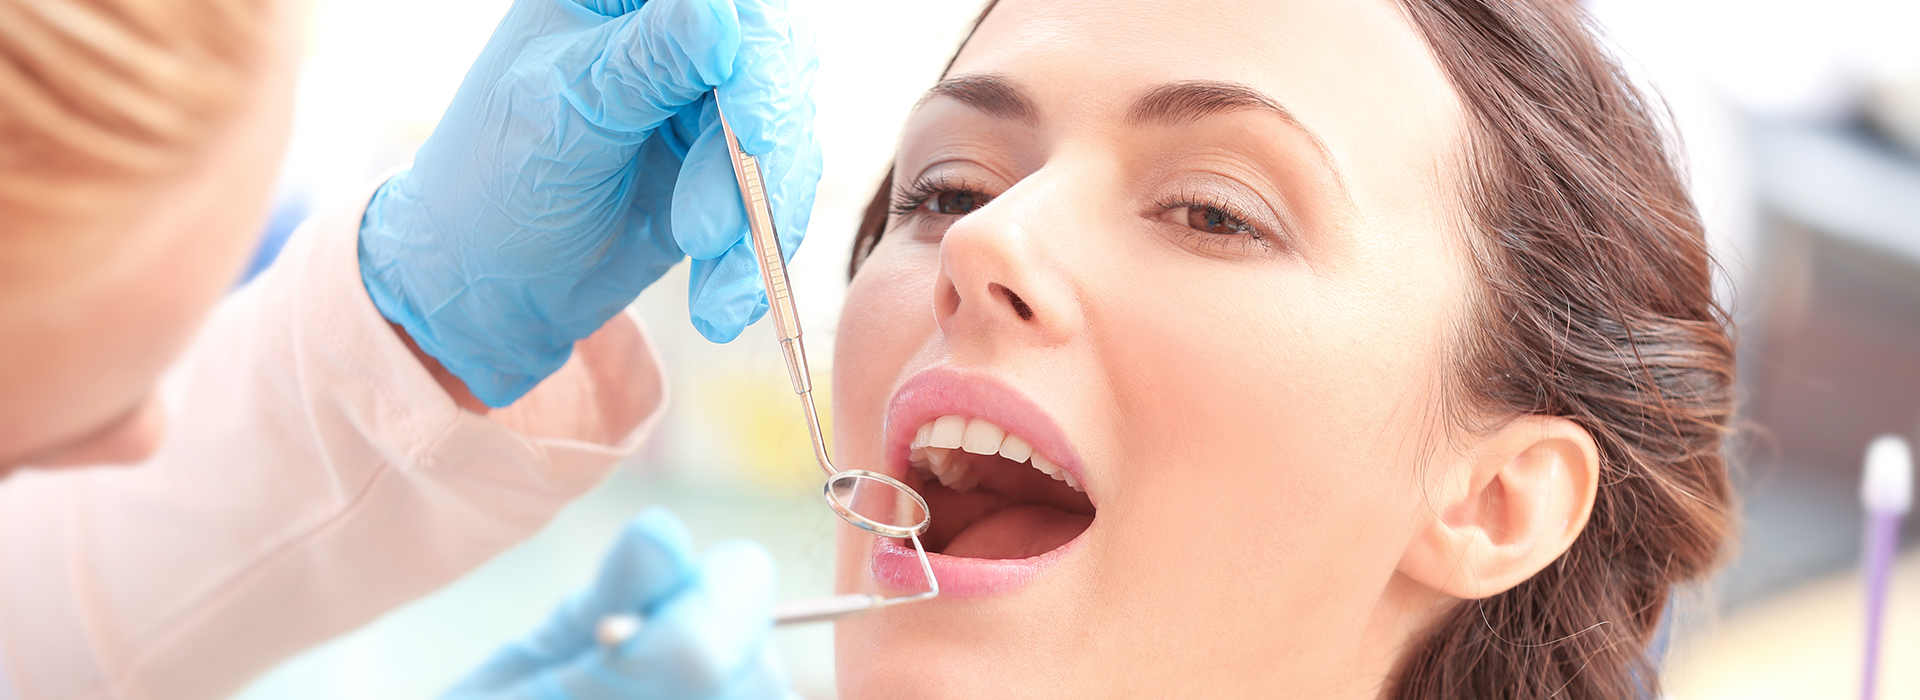 Glowing Smile Dental Studio | Root Canals, Cosmetic Dentistry and Dental Bridges